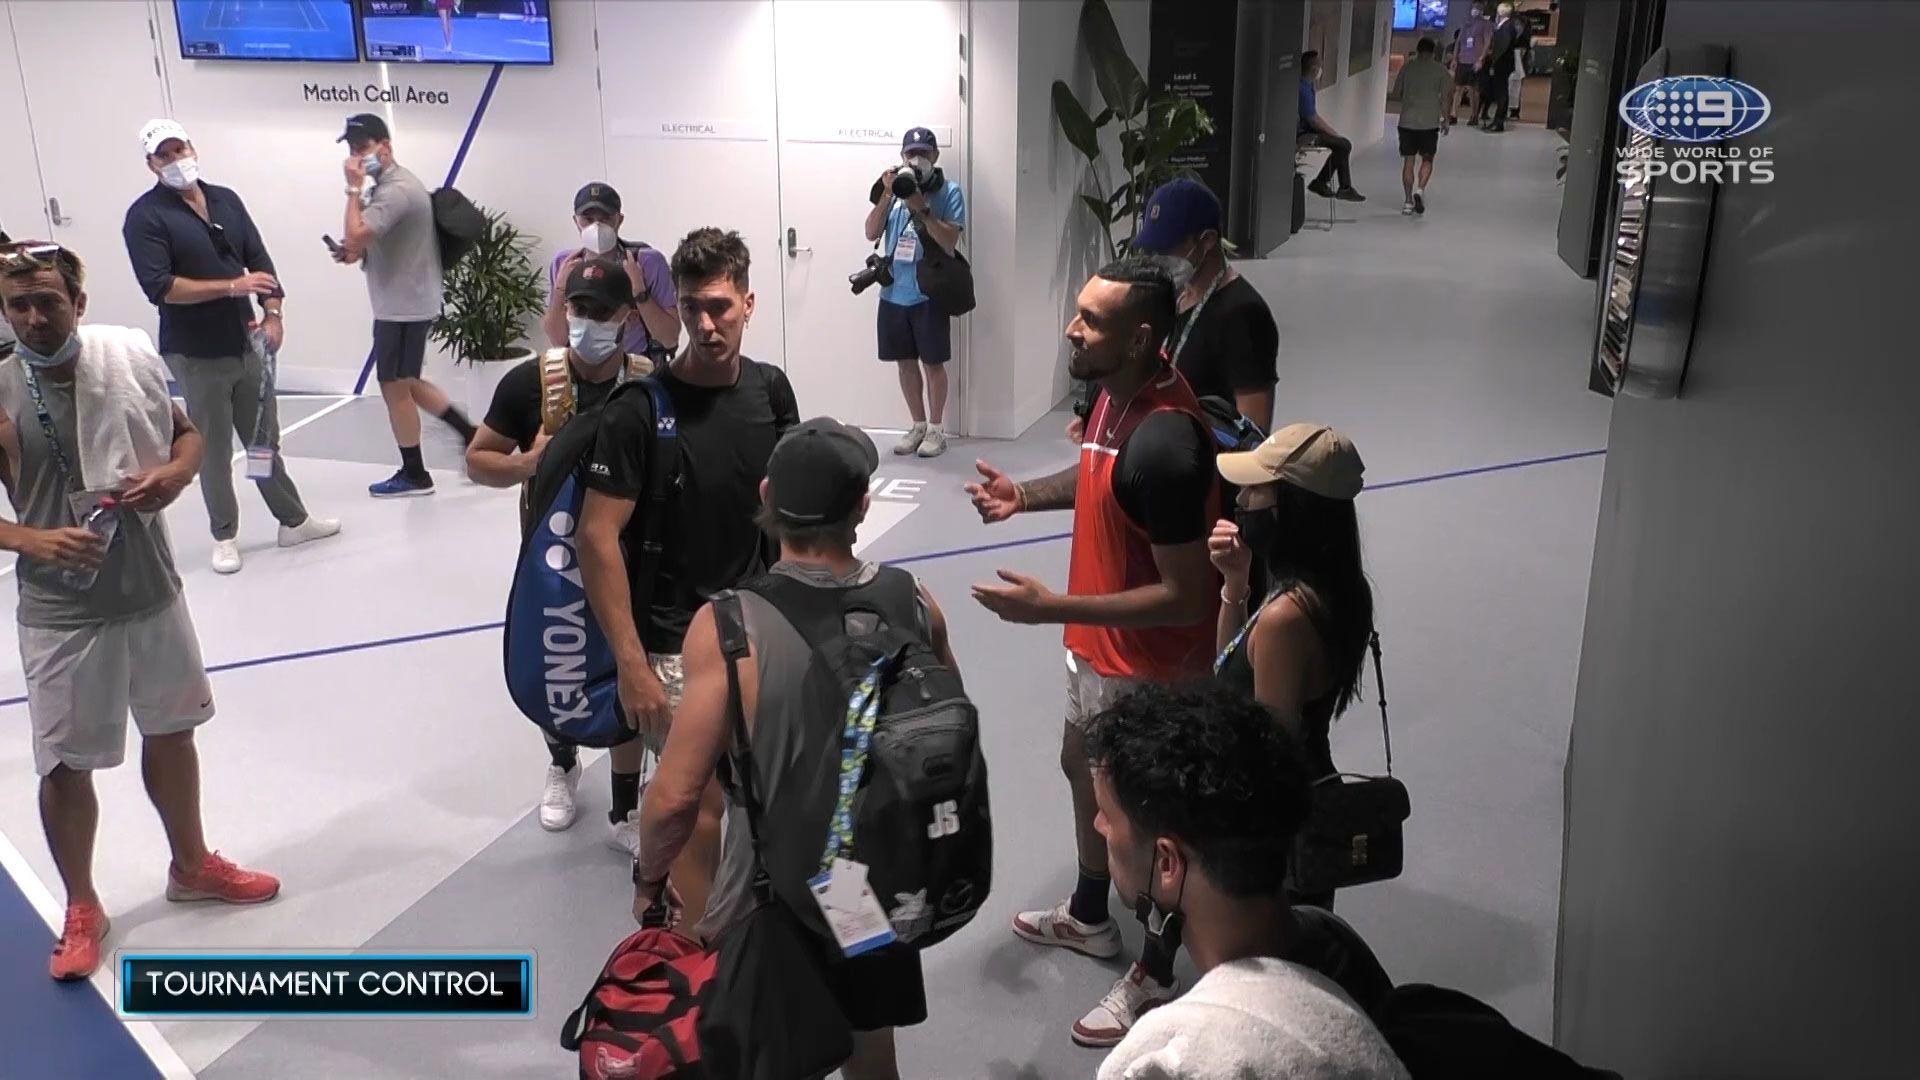 Revealed: video of the moment after Nick Kyrgios, Thanasi Kokkinakis in heated exchange with coach